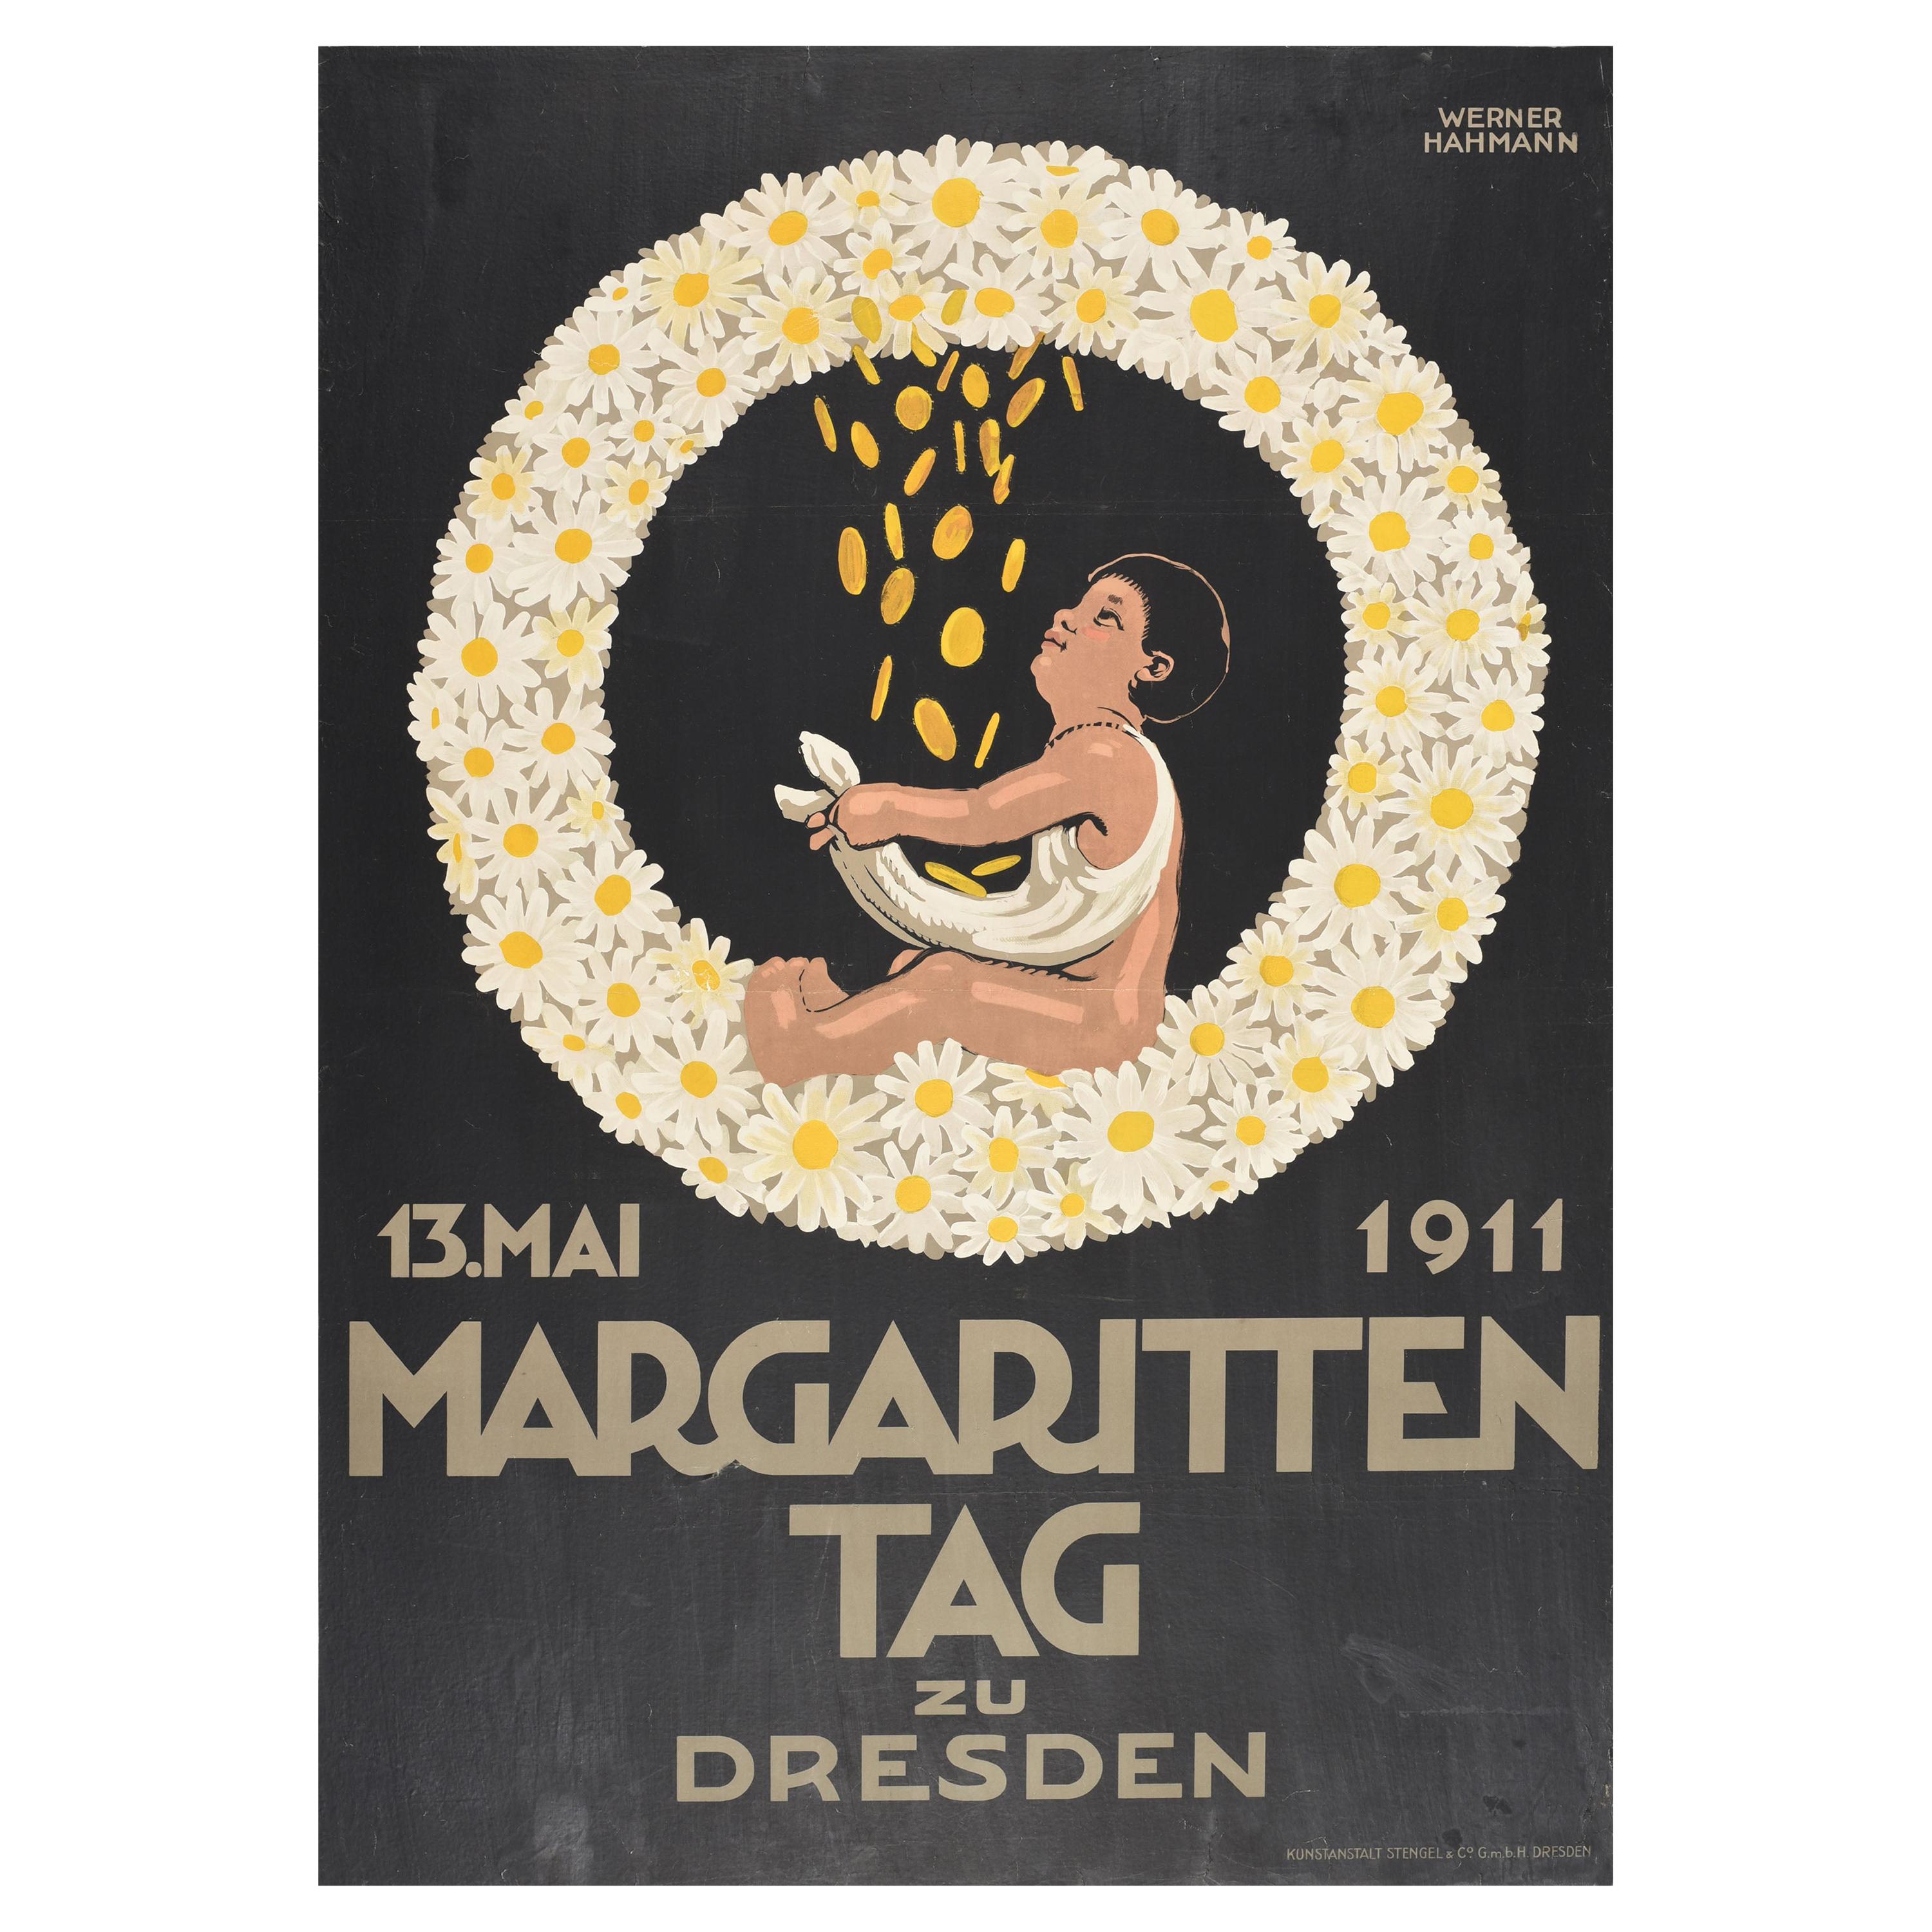 Original Antique Poster Margaritten Tag Dresden Daisy Flowers Child Charity Day For Sale